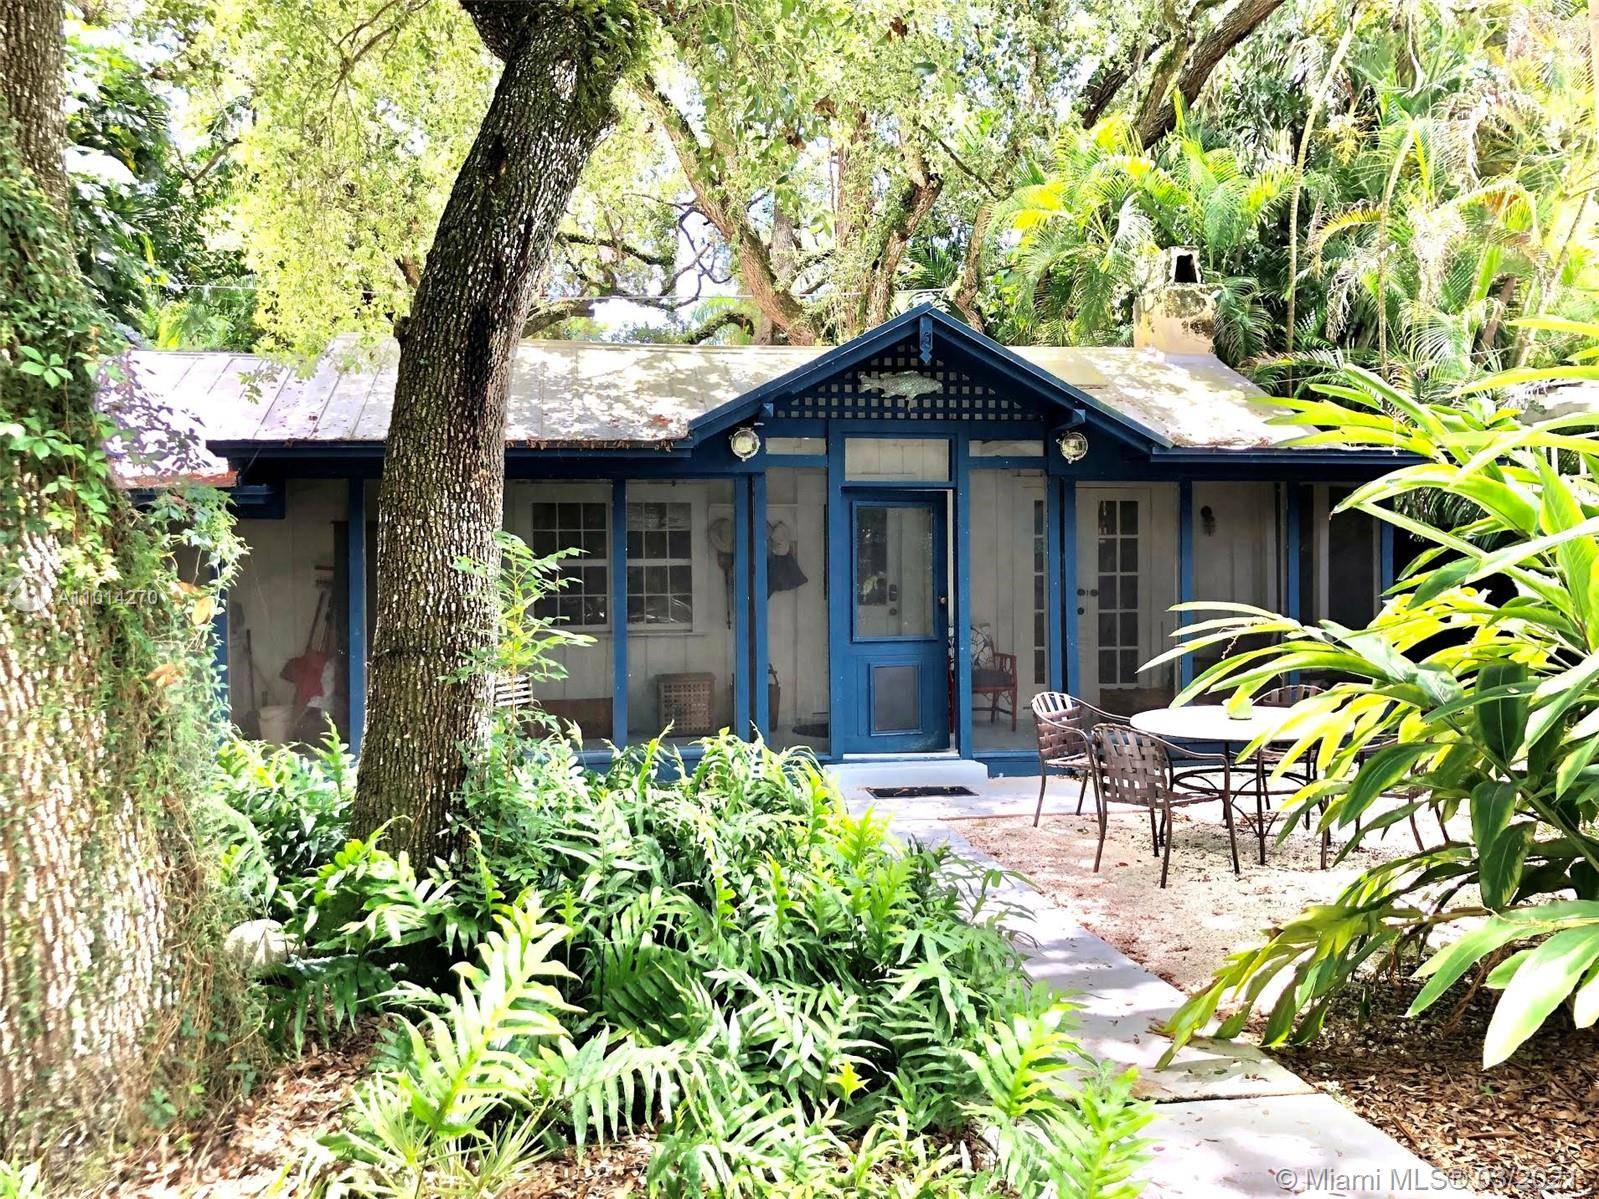 Classic 1924 cottage located on sought after Royal Palm Ave.